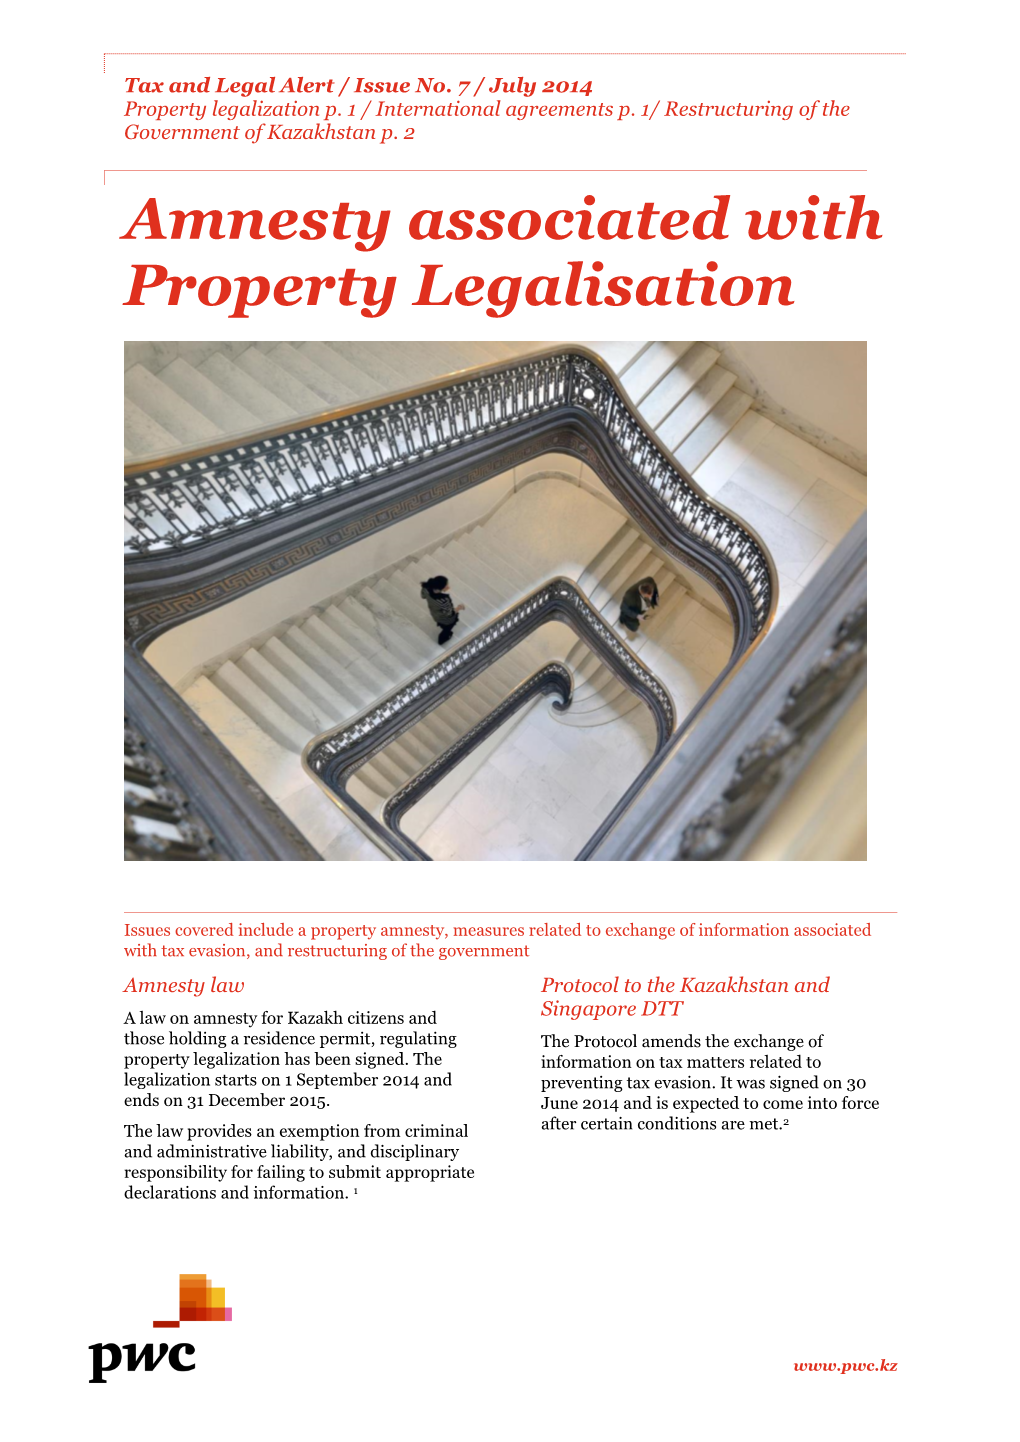 Amnesty Associated with Property Legalisation